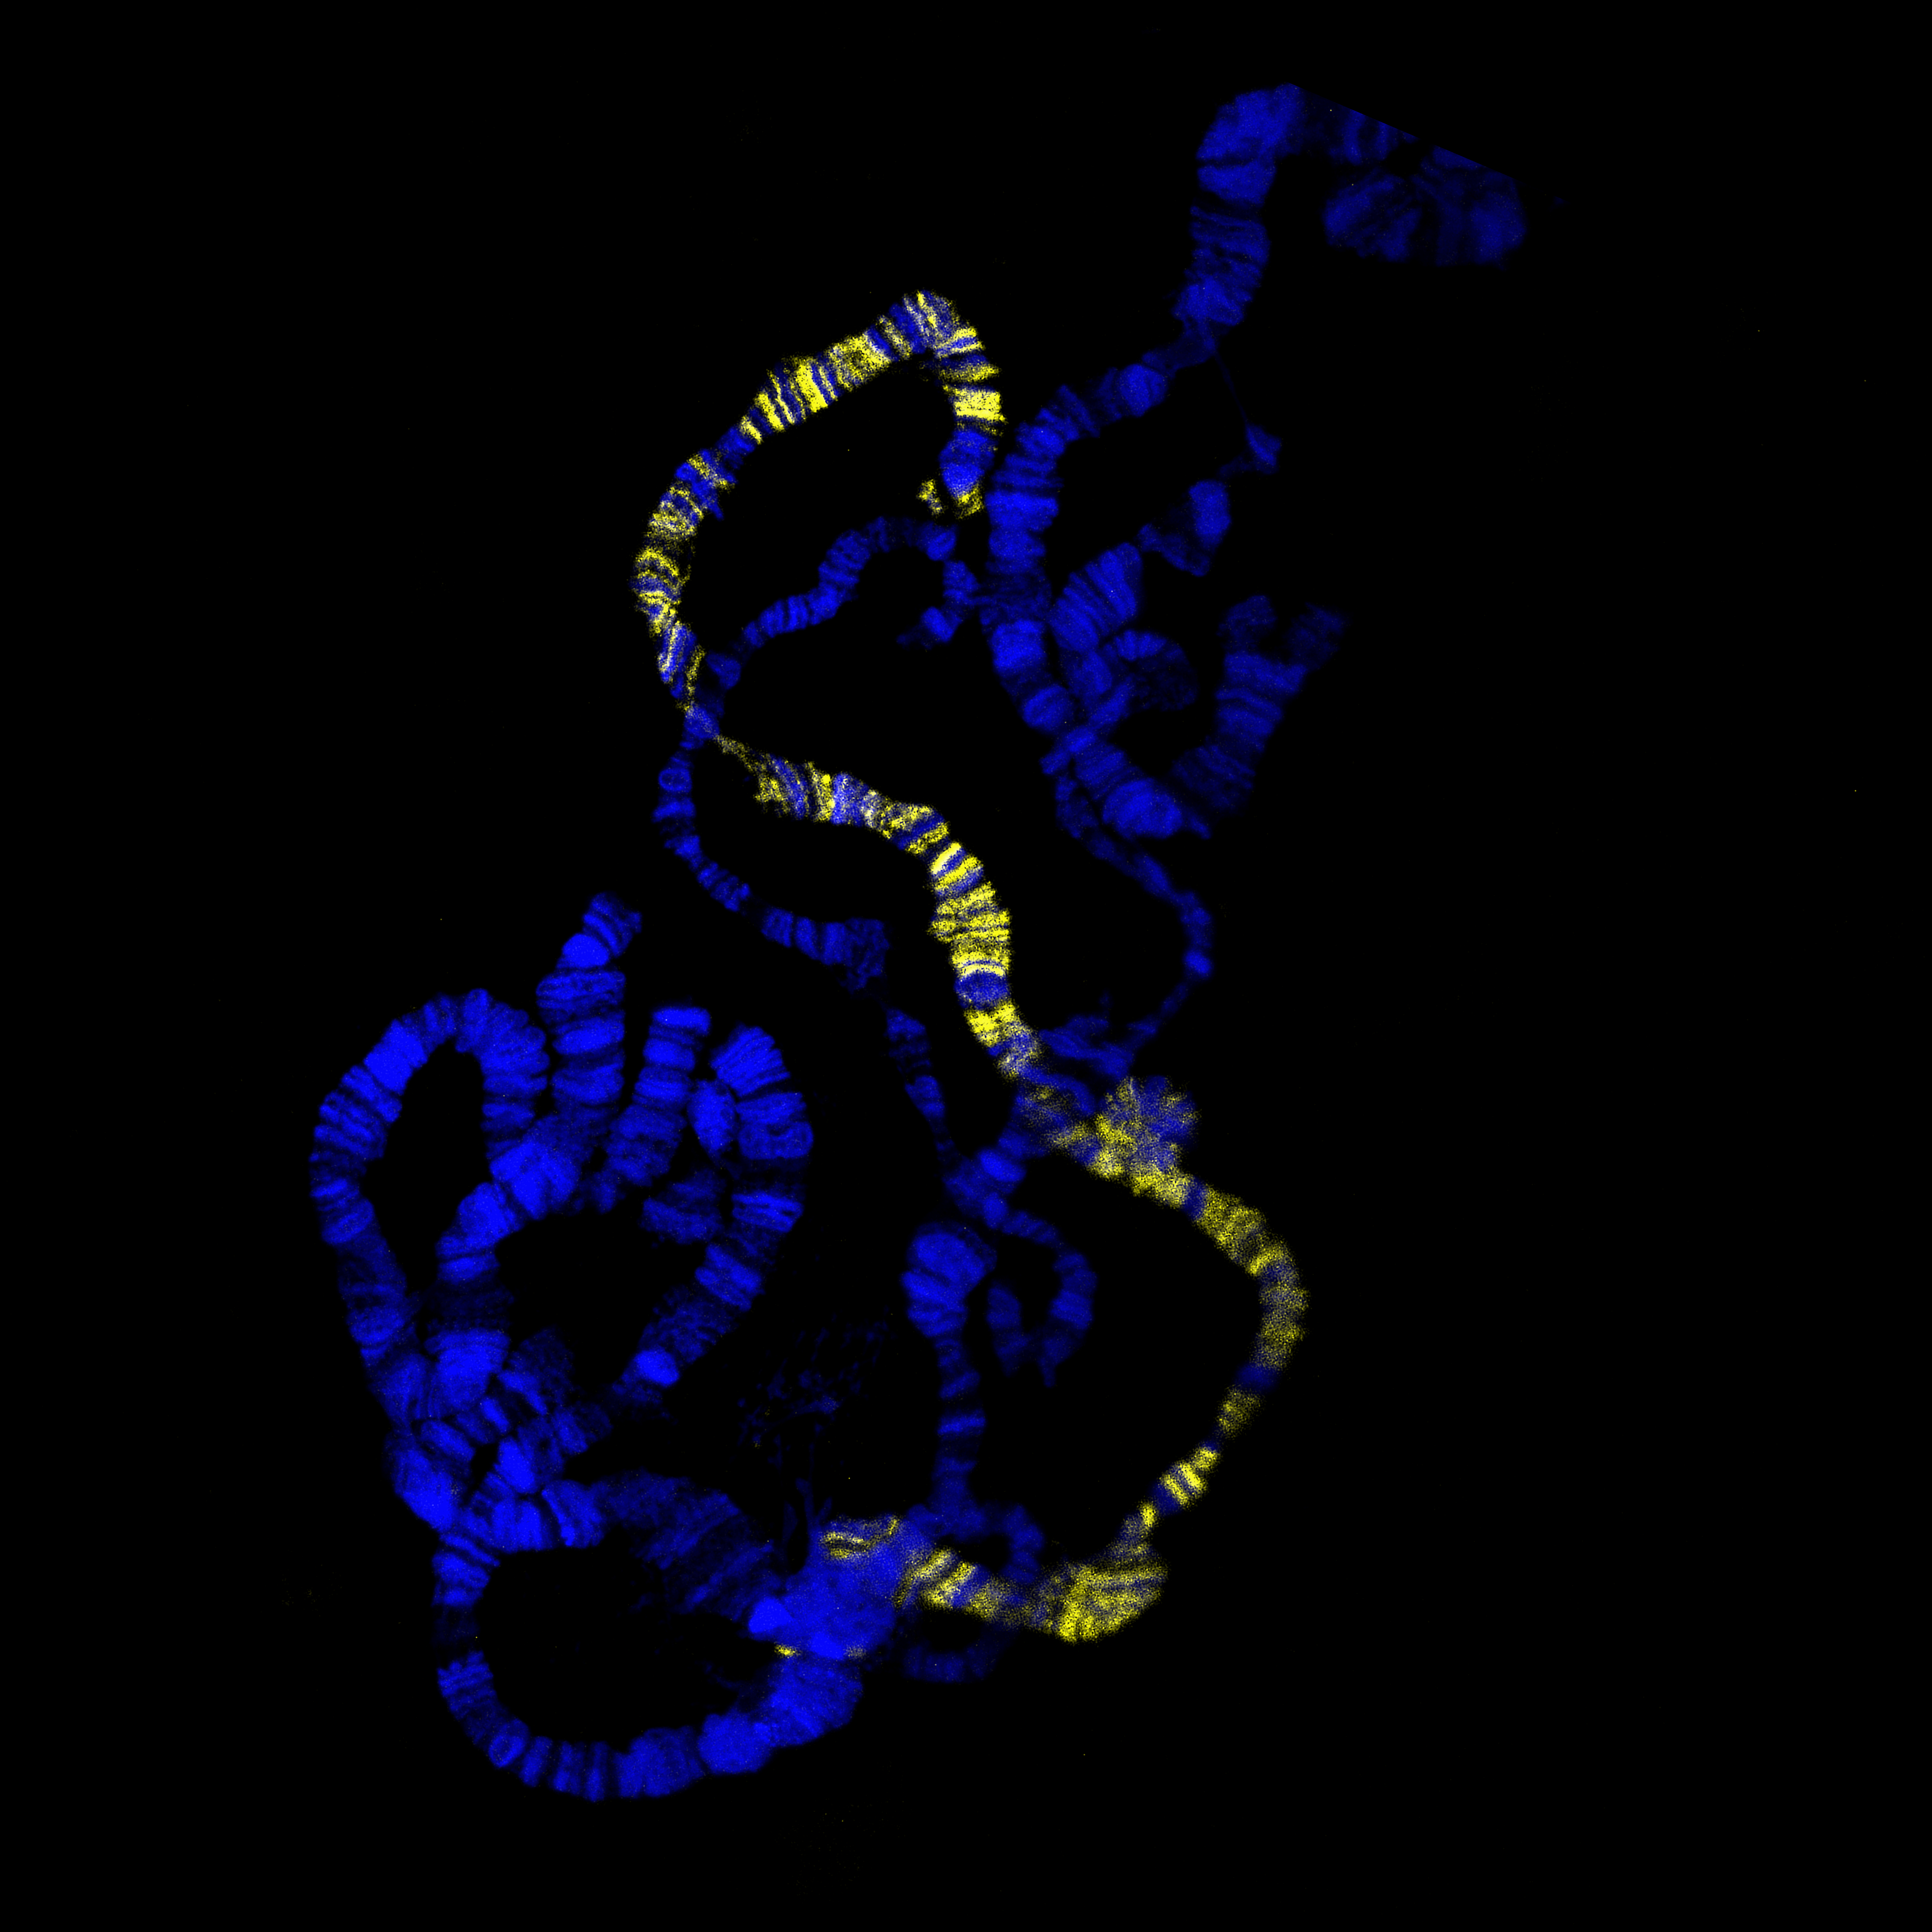 Against a black background, a yellow glowing chromosome is visible between blue coloured chromosomes.